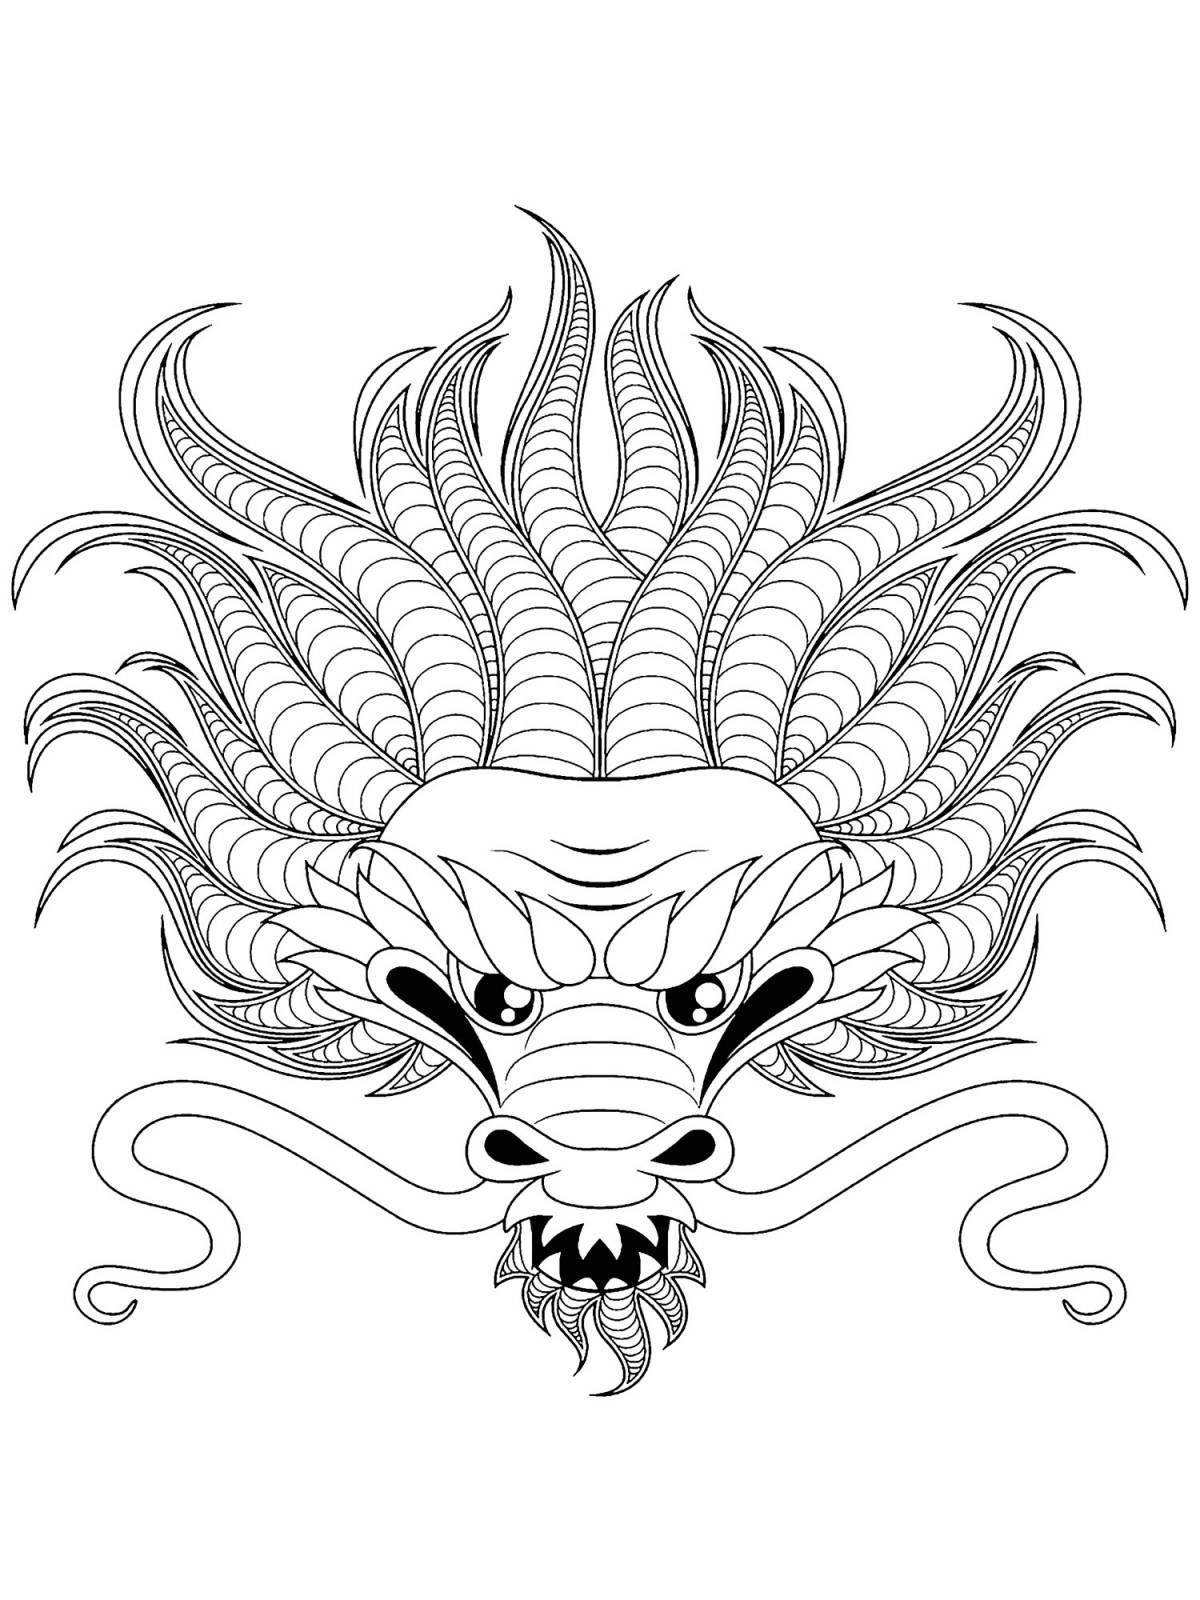 Amazing dragon mask coloring book